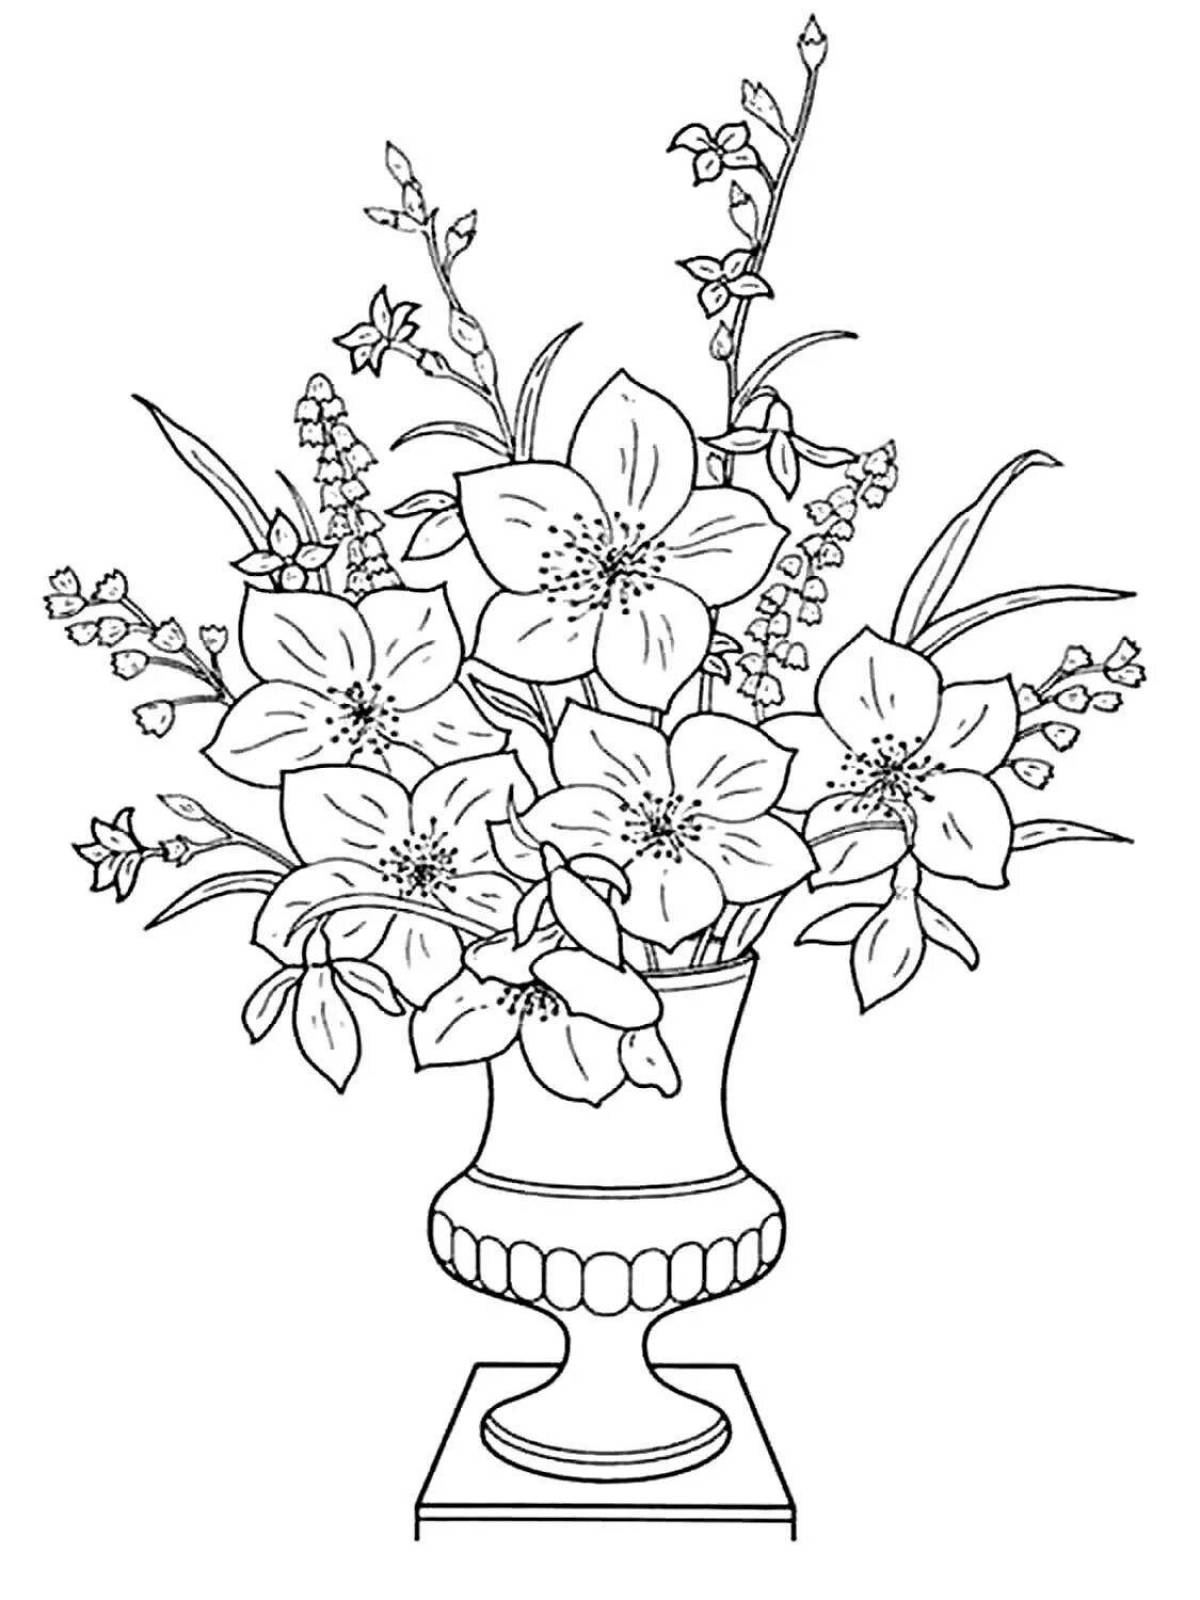 Harmonious coloring flowers in a vase